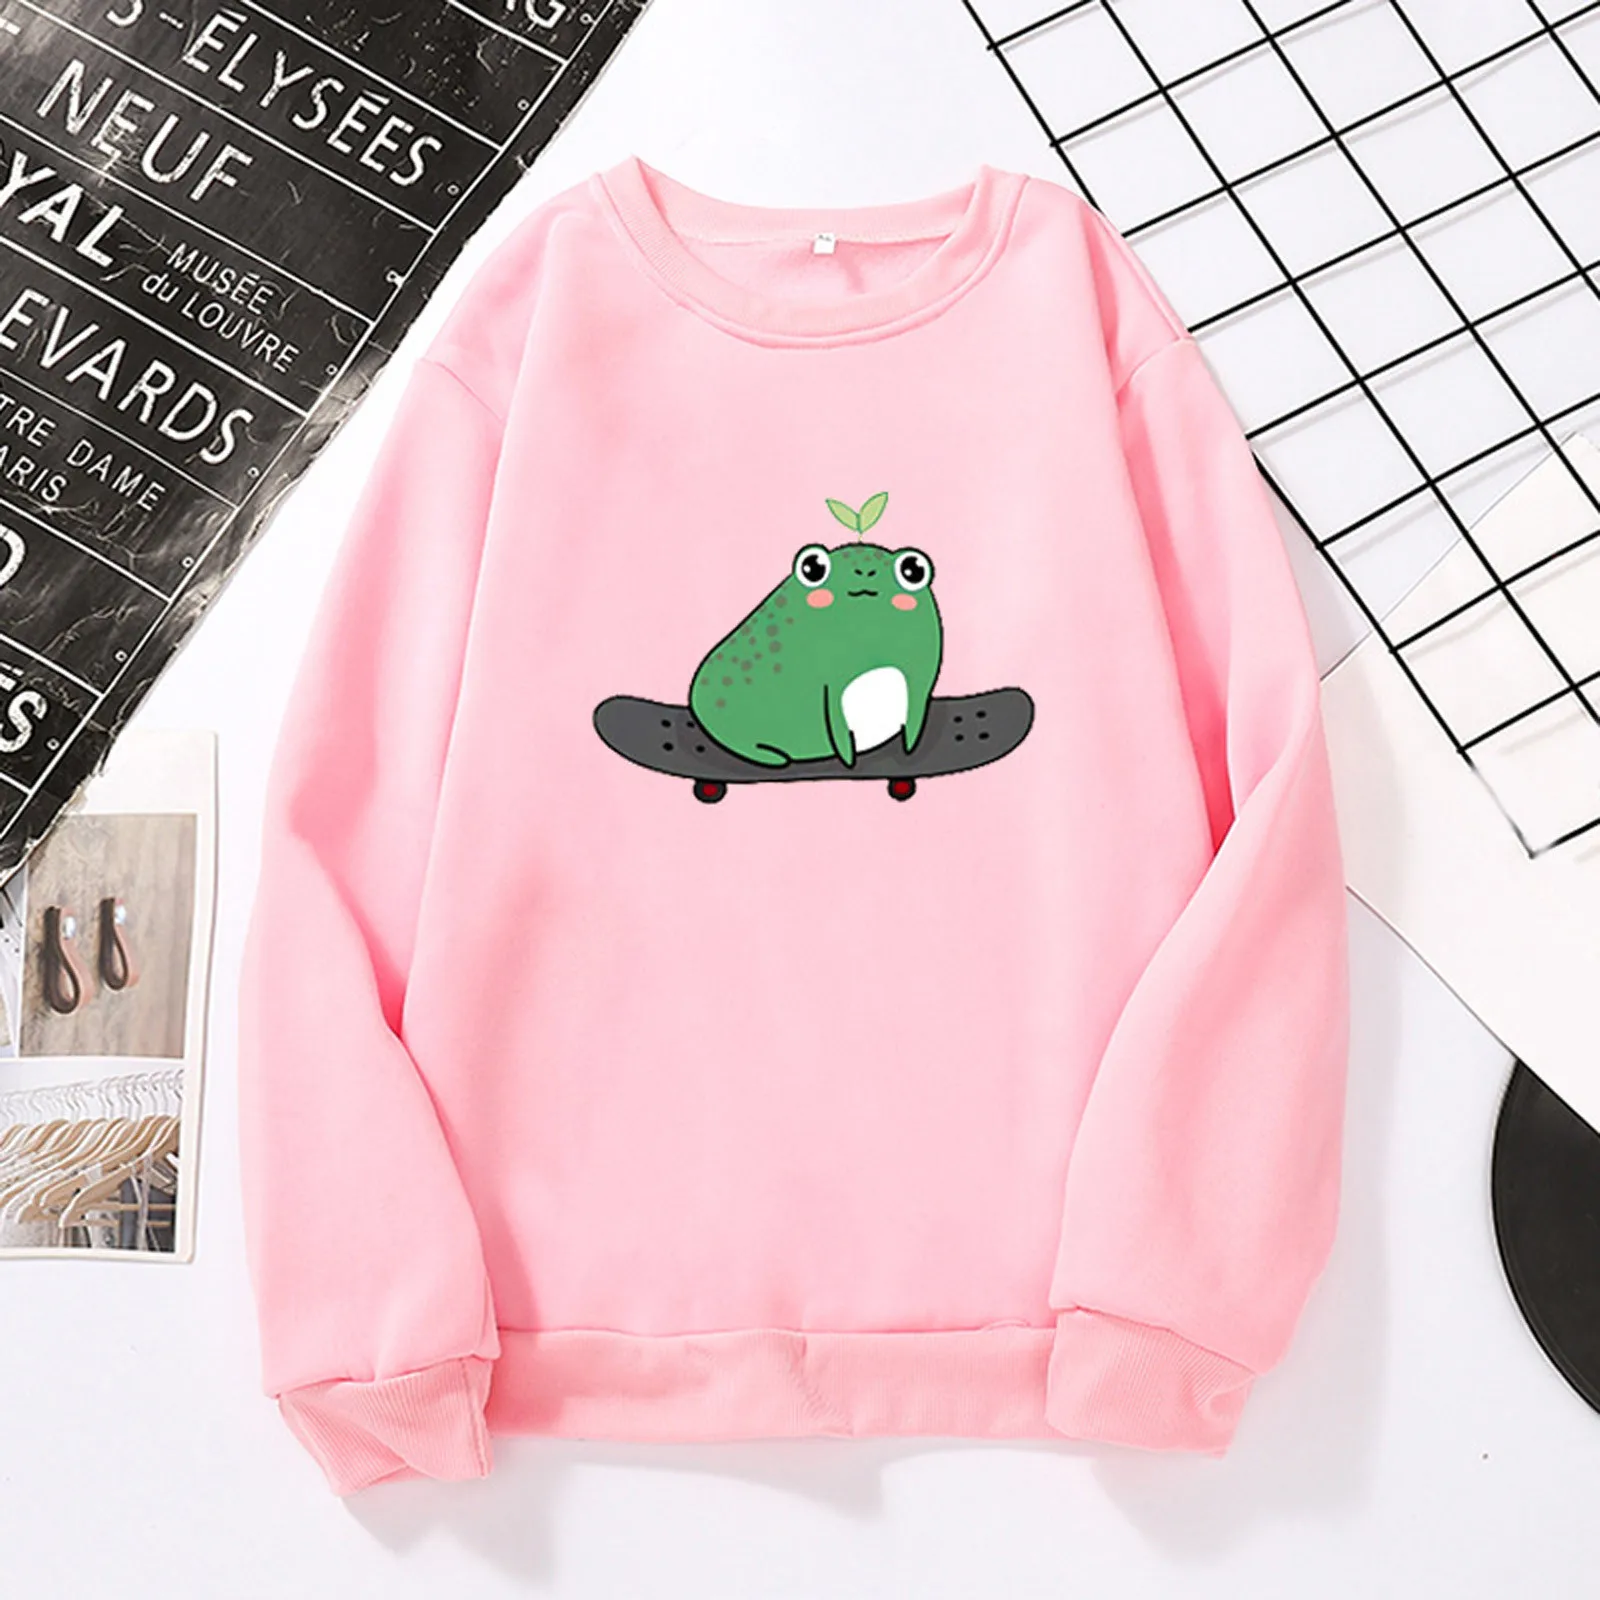 Long Sleeve Cute Hoodies Womens Animal Frog Printed Sweatershirt Loose Pink Hooded Blouse Tops Autumn Womens Work Tee Shirts 100 500 pcs animal good job cool stickers for praise reward student work label stationery sticker 1inch envelope seals labels